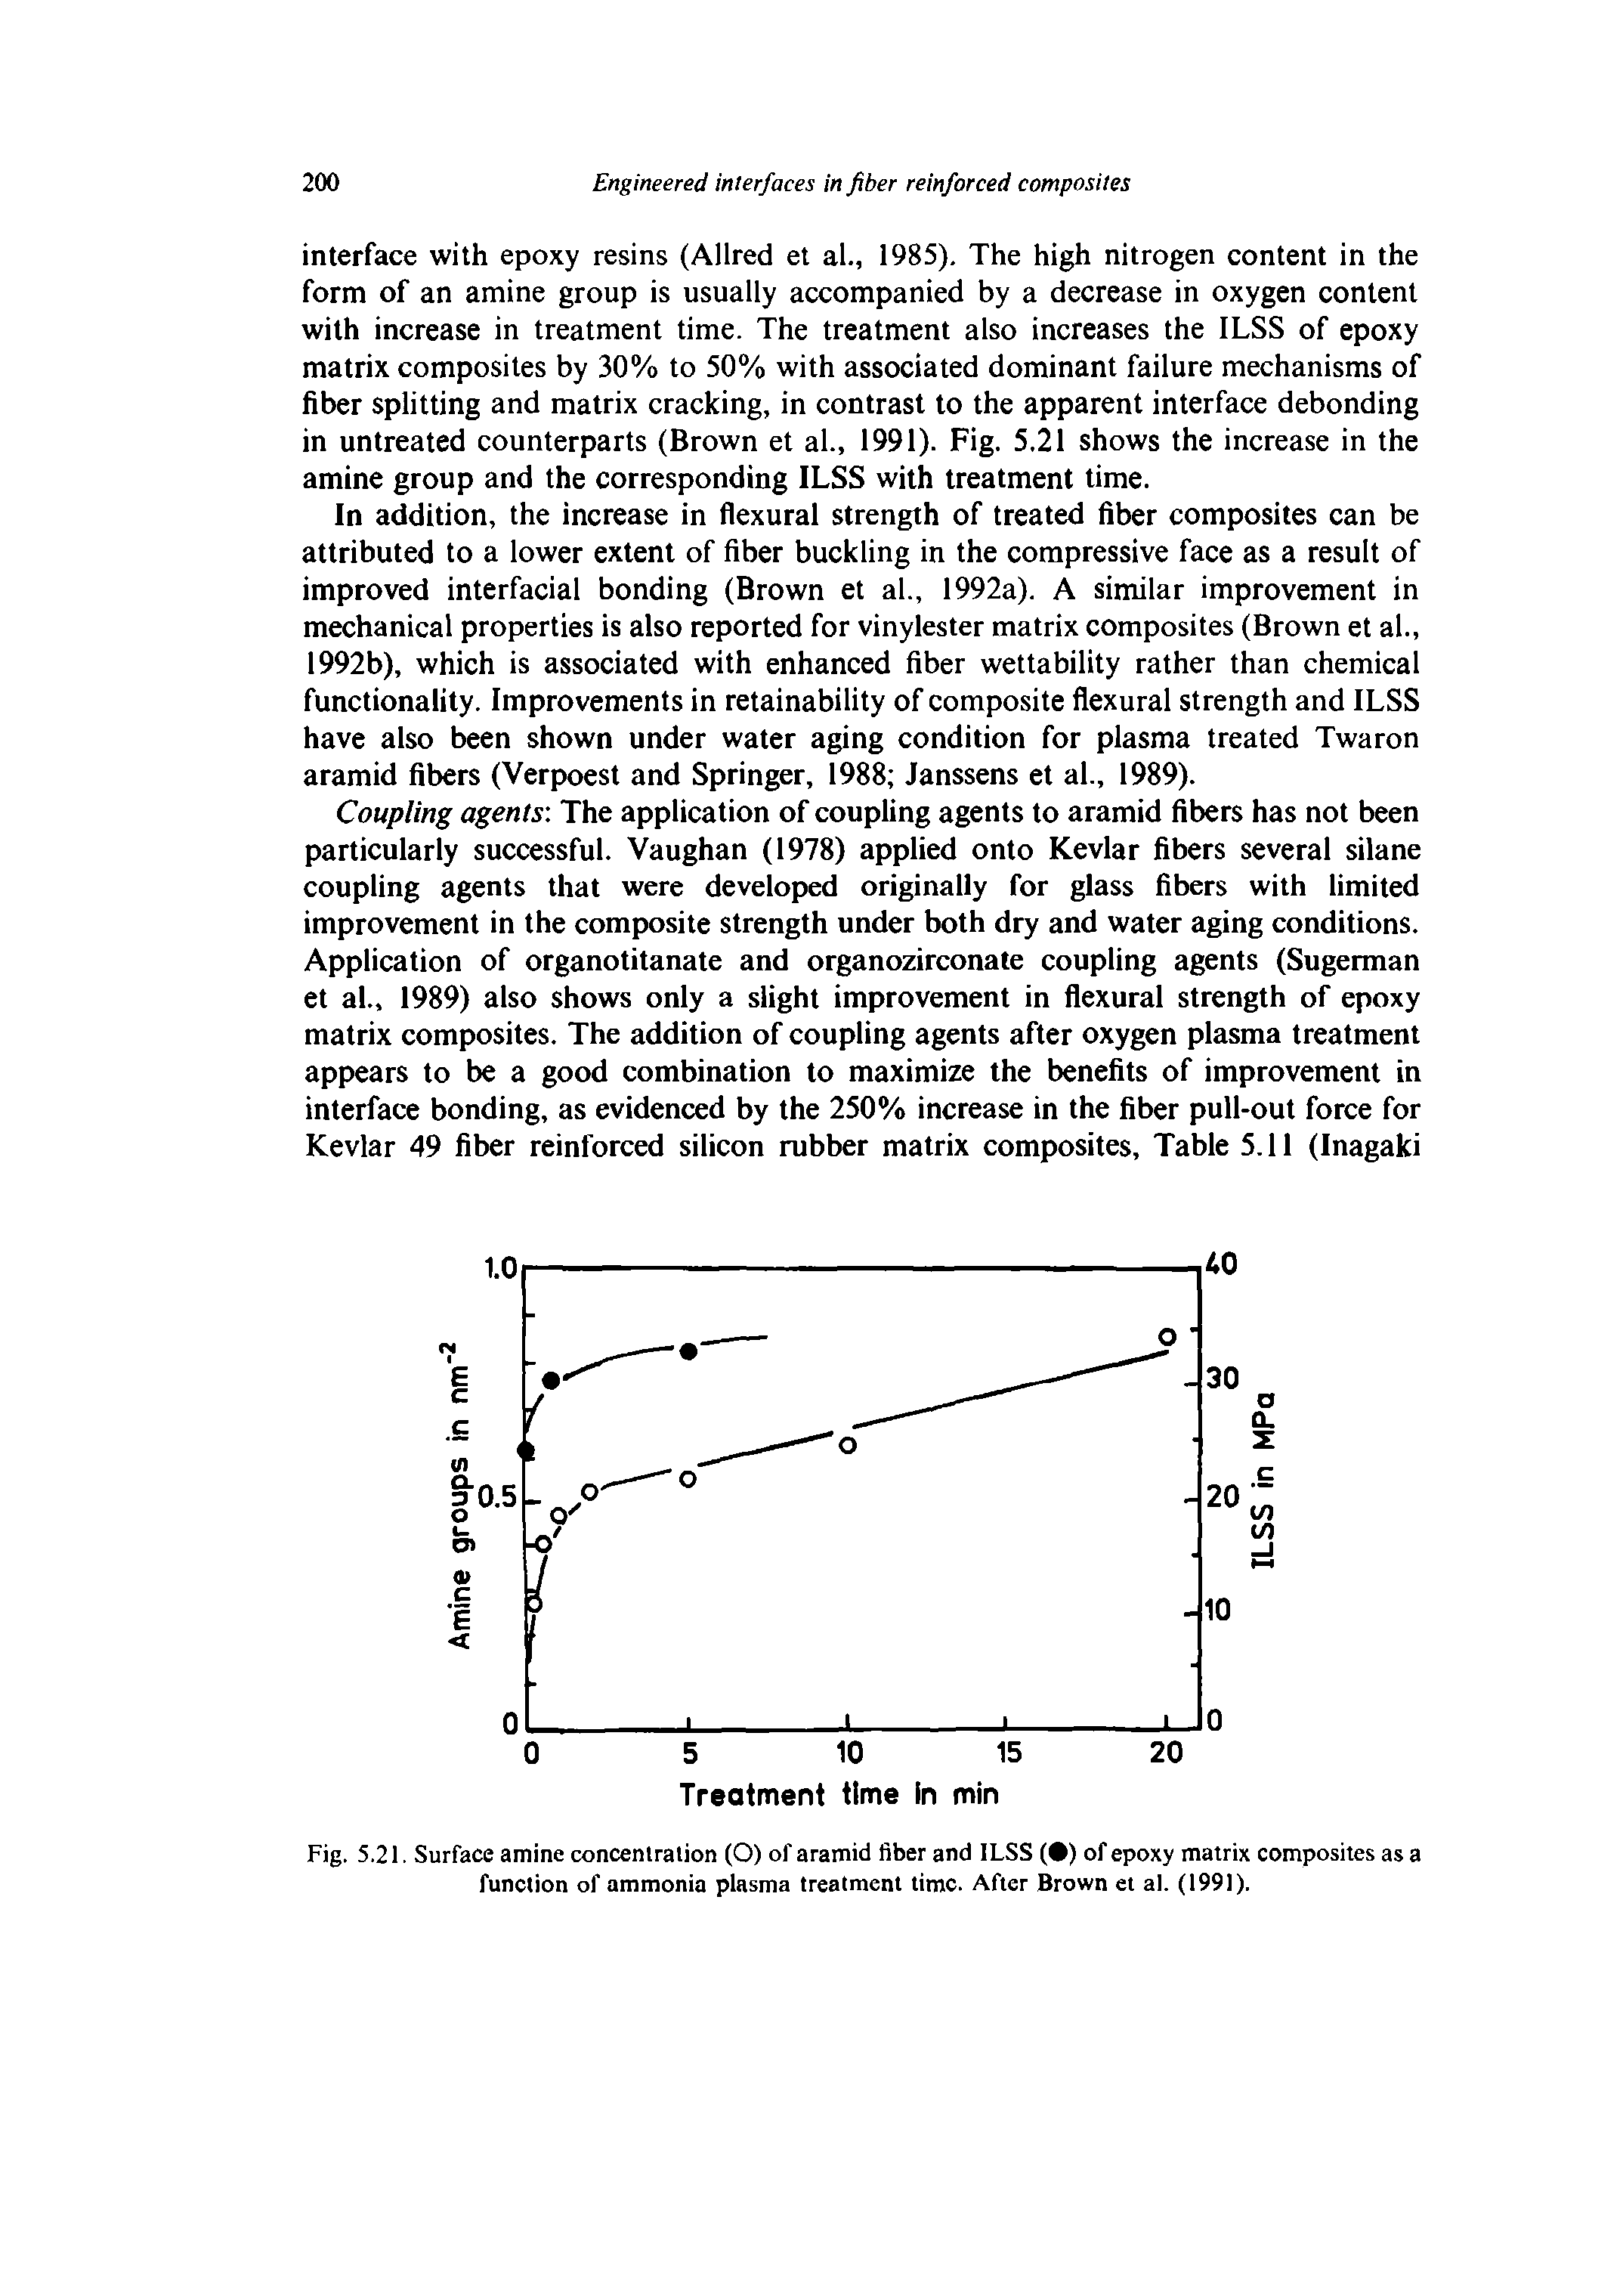 Fig. 5.21. Surface amine concenlralion (O) of aramid fiber and ILSS ( ) of epoxy matrix composites as a function of ammonia plasma treatment time. After Brown et al. (1991).